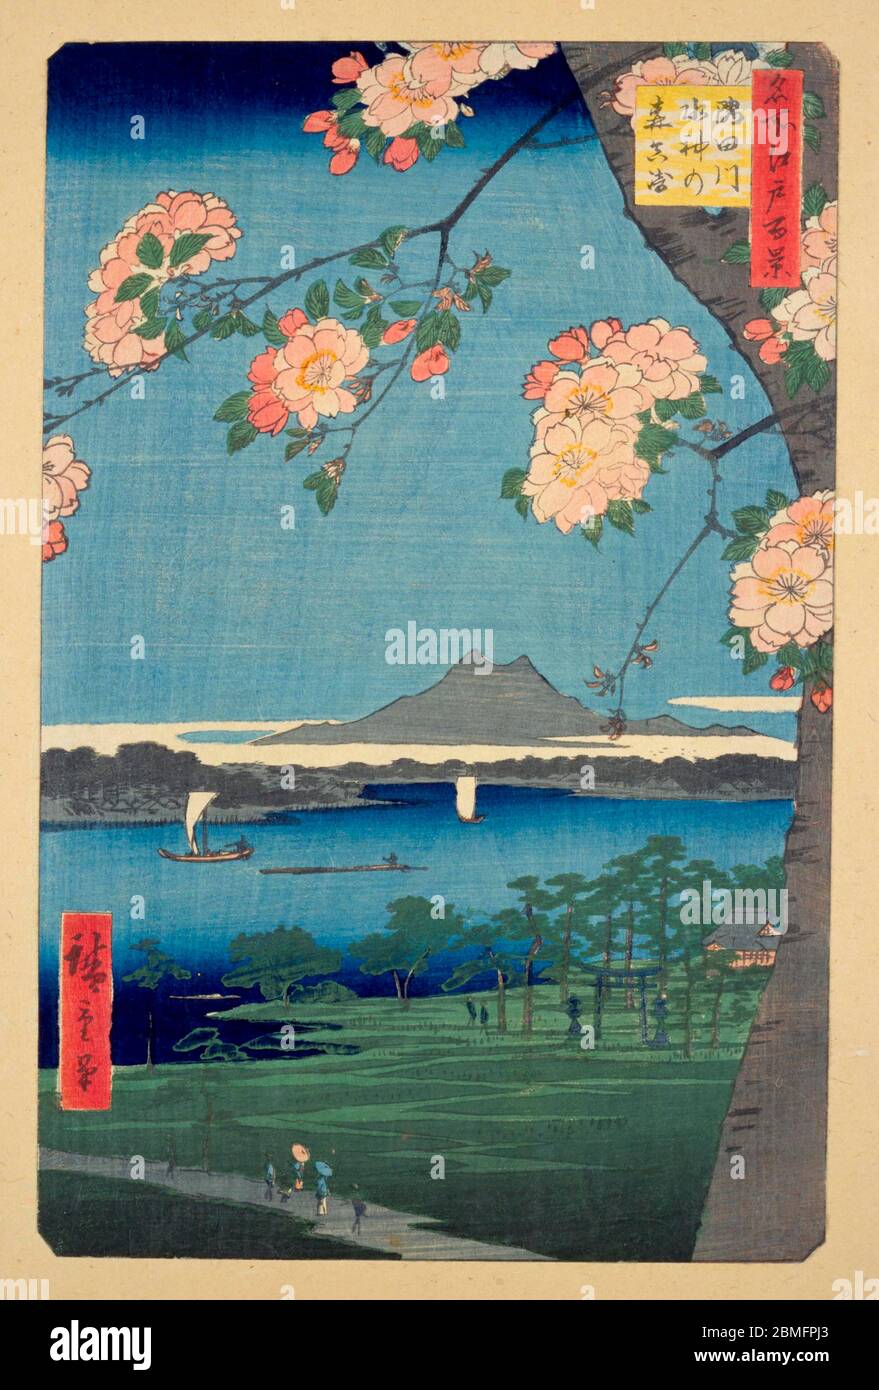 [ 1850s Japan - Cherry Blossom and Boats ] —   Cherry blossom and sailing vessels on the Sumidagawa River in Edo (current Tokyo), 1856 (Ansei 3). In the back, Mount Tsukuba can be seen.  This woodblock print is image 35 in One Hundred Famous Views of Edo (名所江戸百景, Meisho Edo Hyakkei), a series created by ukiyoe artist Utagawa Hiroshige (歌川広重, 1797–1858).  It is one of 42 spring scenes in the series.  Title: Suijin Shrine and Massaki on the Sumida River (隅田川水神の森真崎, Sumidagawa Suijin no mori Massaki)  19th century vintage Ukiyoe woodblock print. Stock Photo